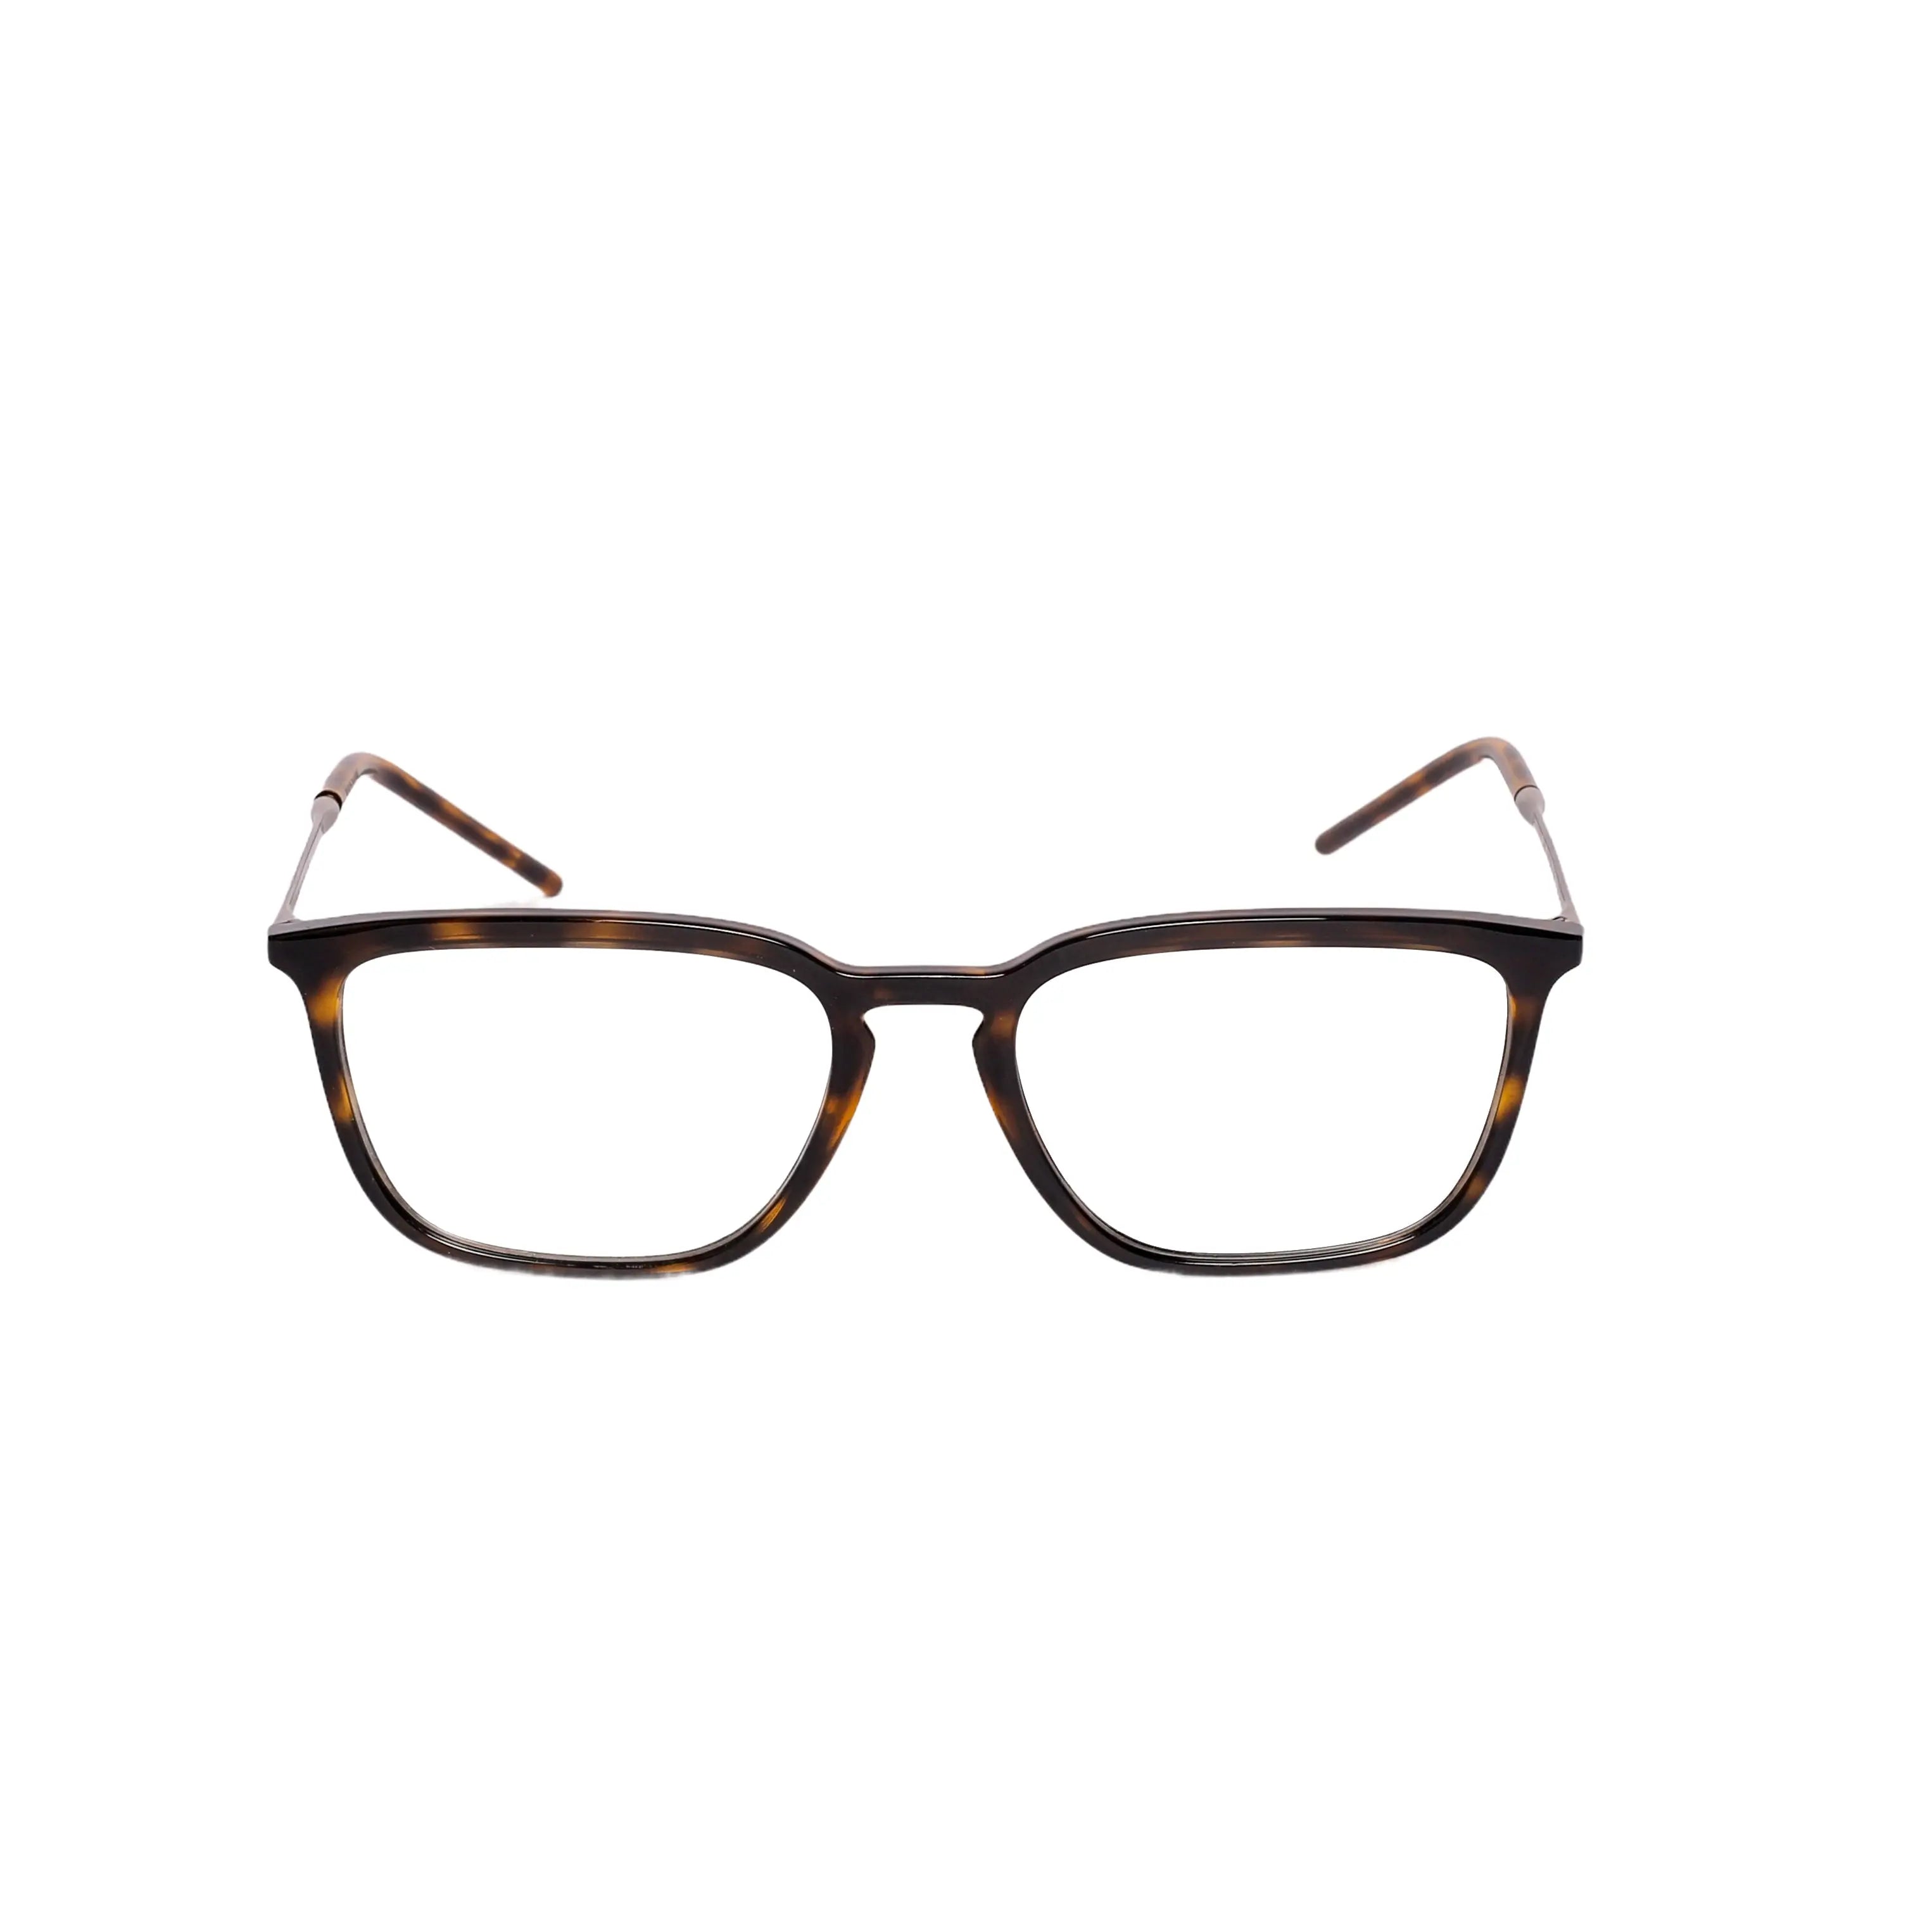 Dolce & Gabbana (D&G) DG 5098-54-502 EyeglassesBring a touch of Italian luxury into your daily look with Dolce &amp; Gabbana's DG 5098-54-502 Eyeglasses! Crafted from ultra-premium materials for an unparalleled lEyeglasses